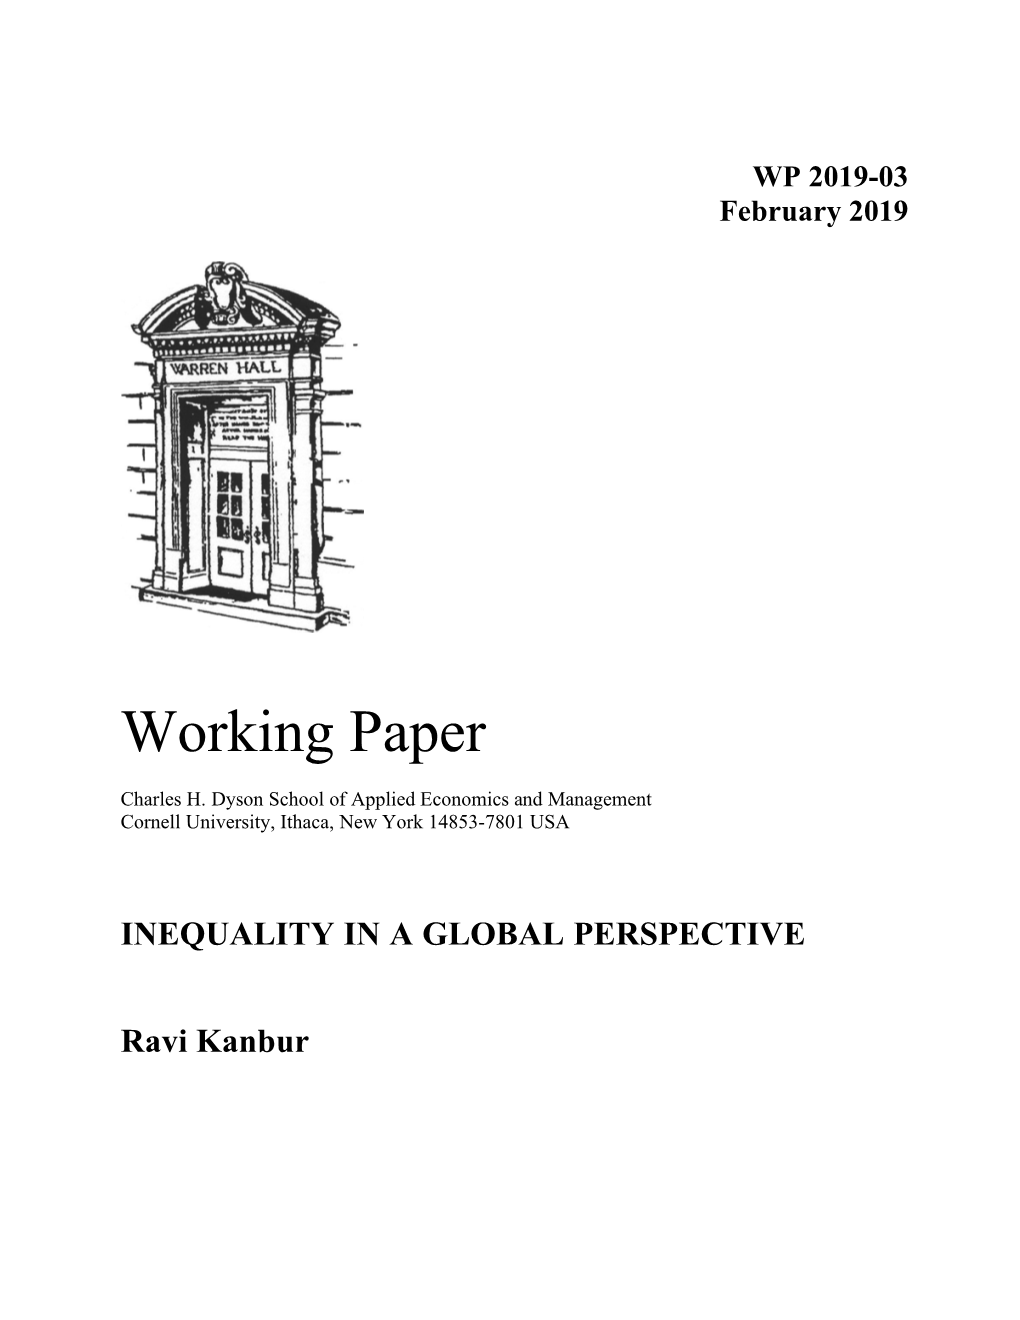 Inequality in a Global Perspective